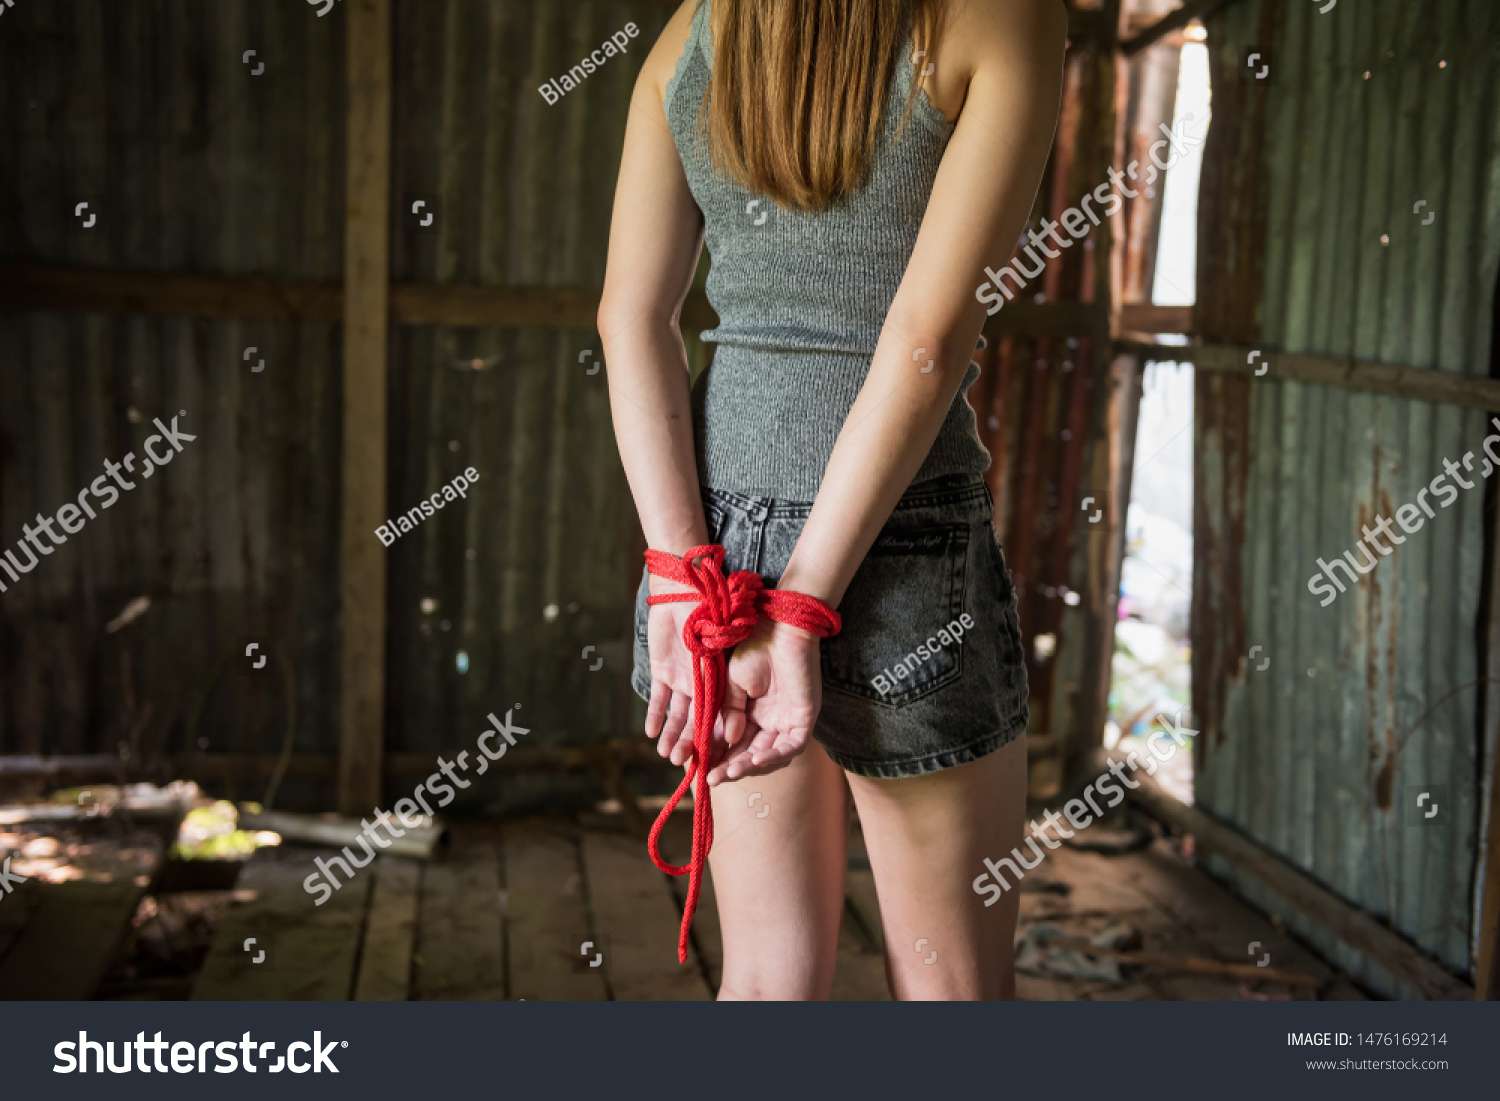 A picture of a girl tied up having sex - Porn Pics & Movies